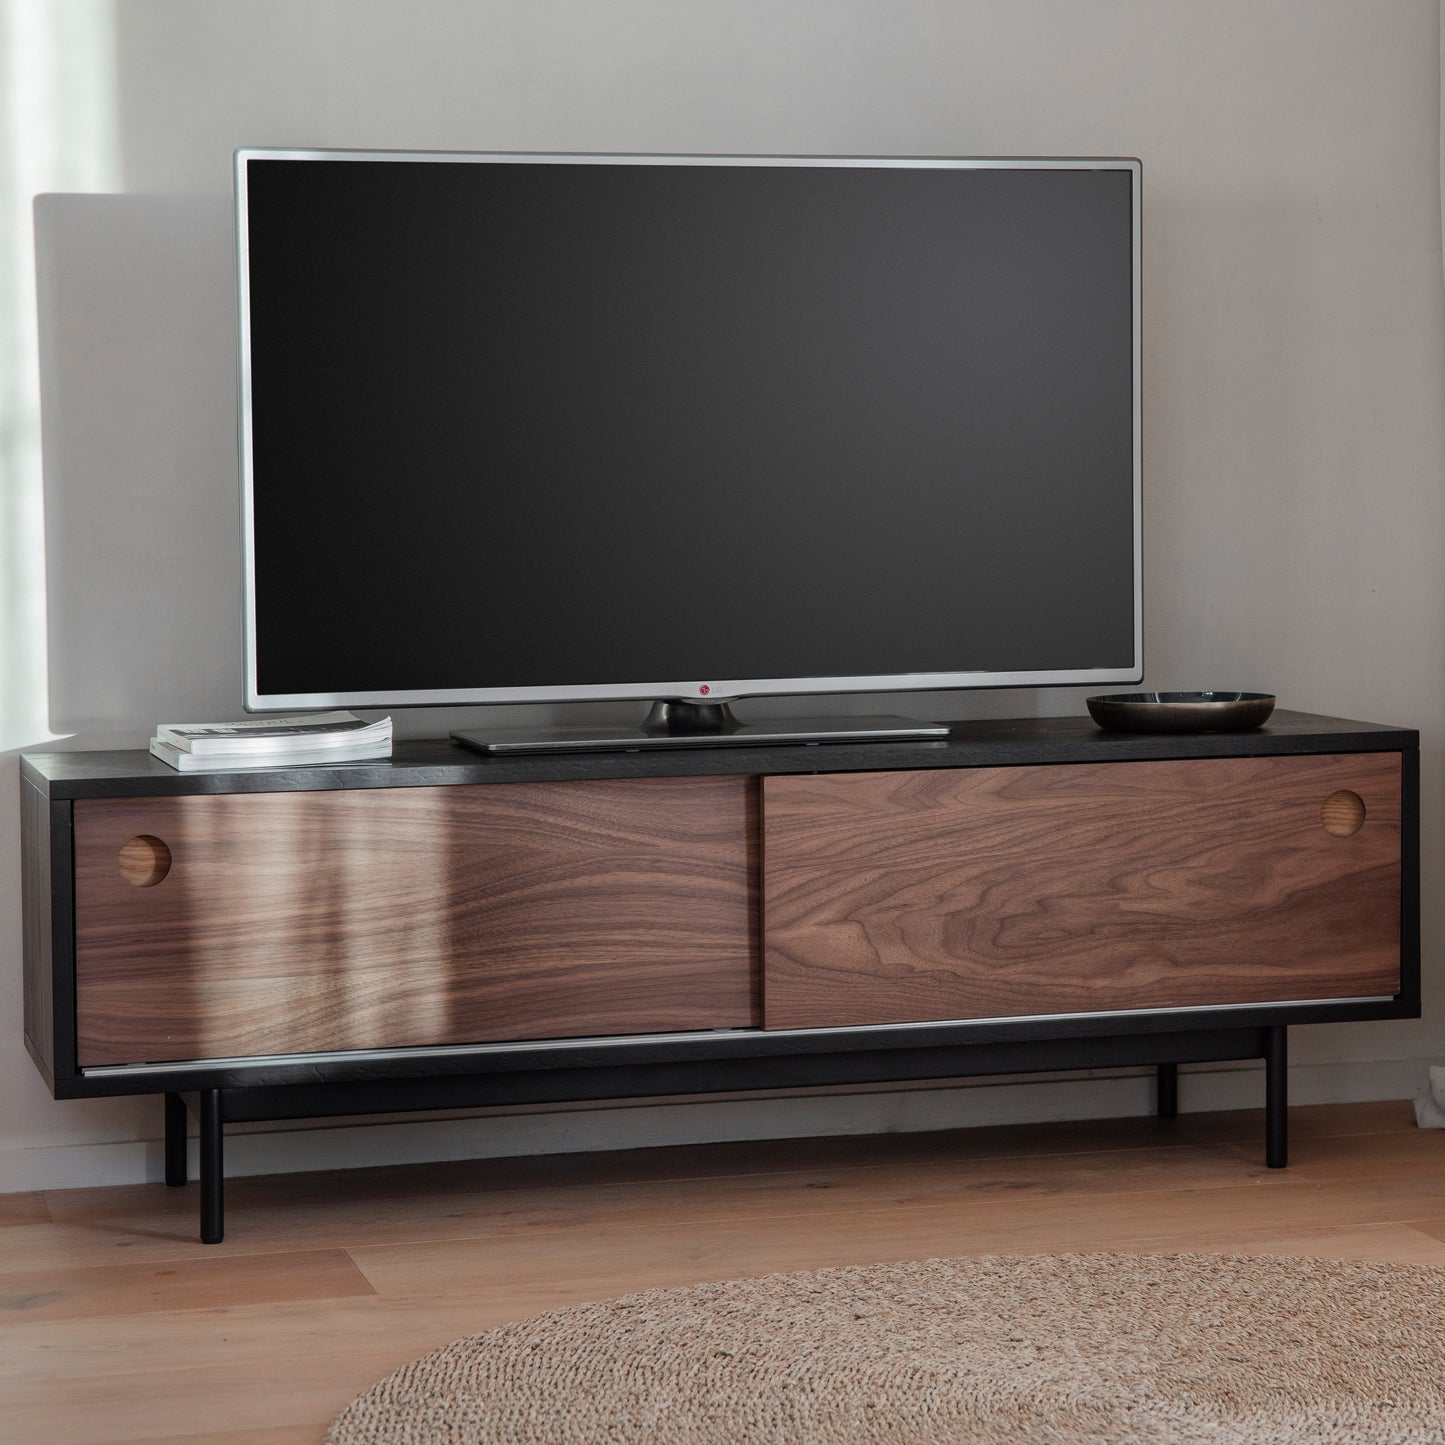 A Barbican Media Unit by Kikiathome.co.uk, perfect for home furniture and interior decor in a living room with a flat screen tv.